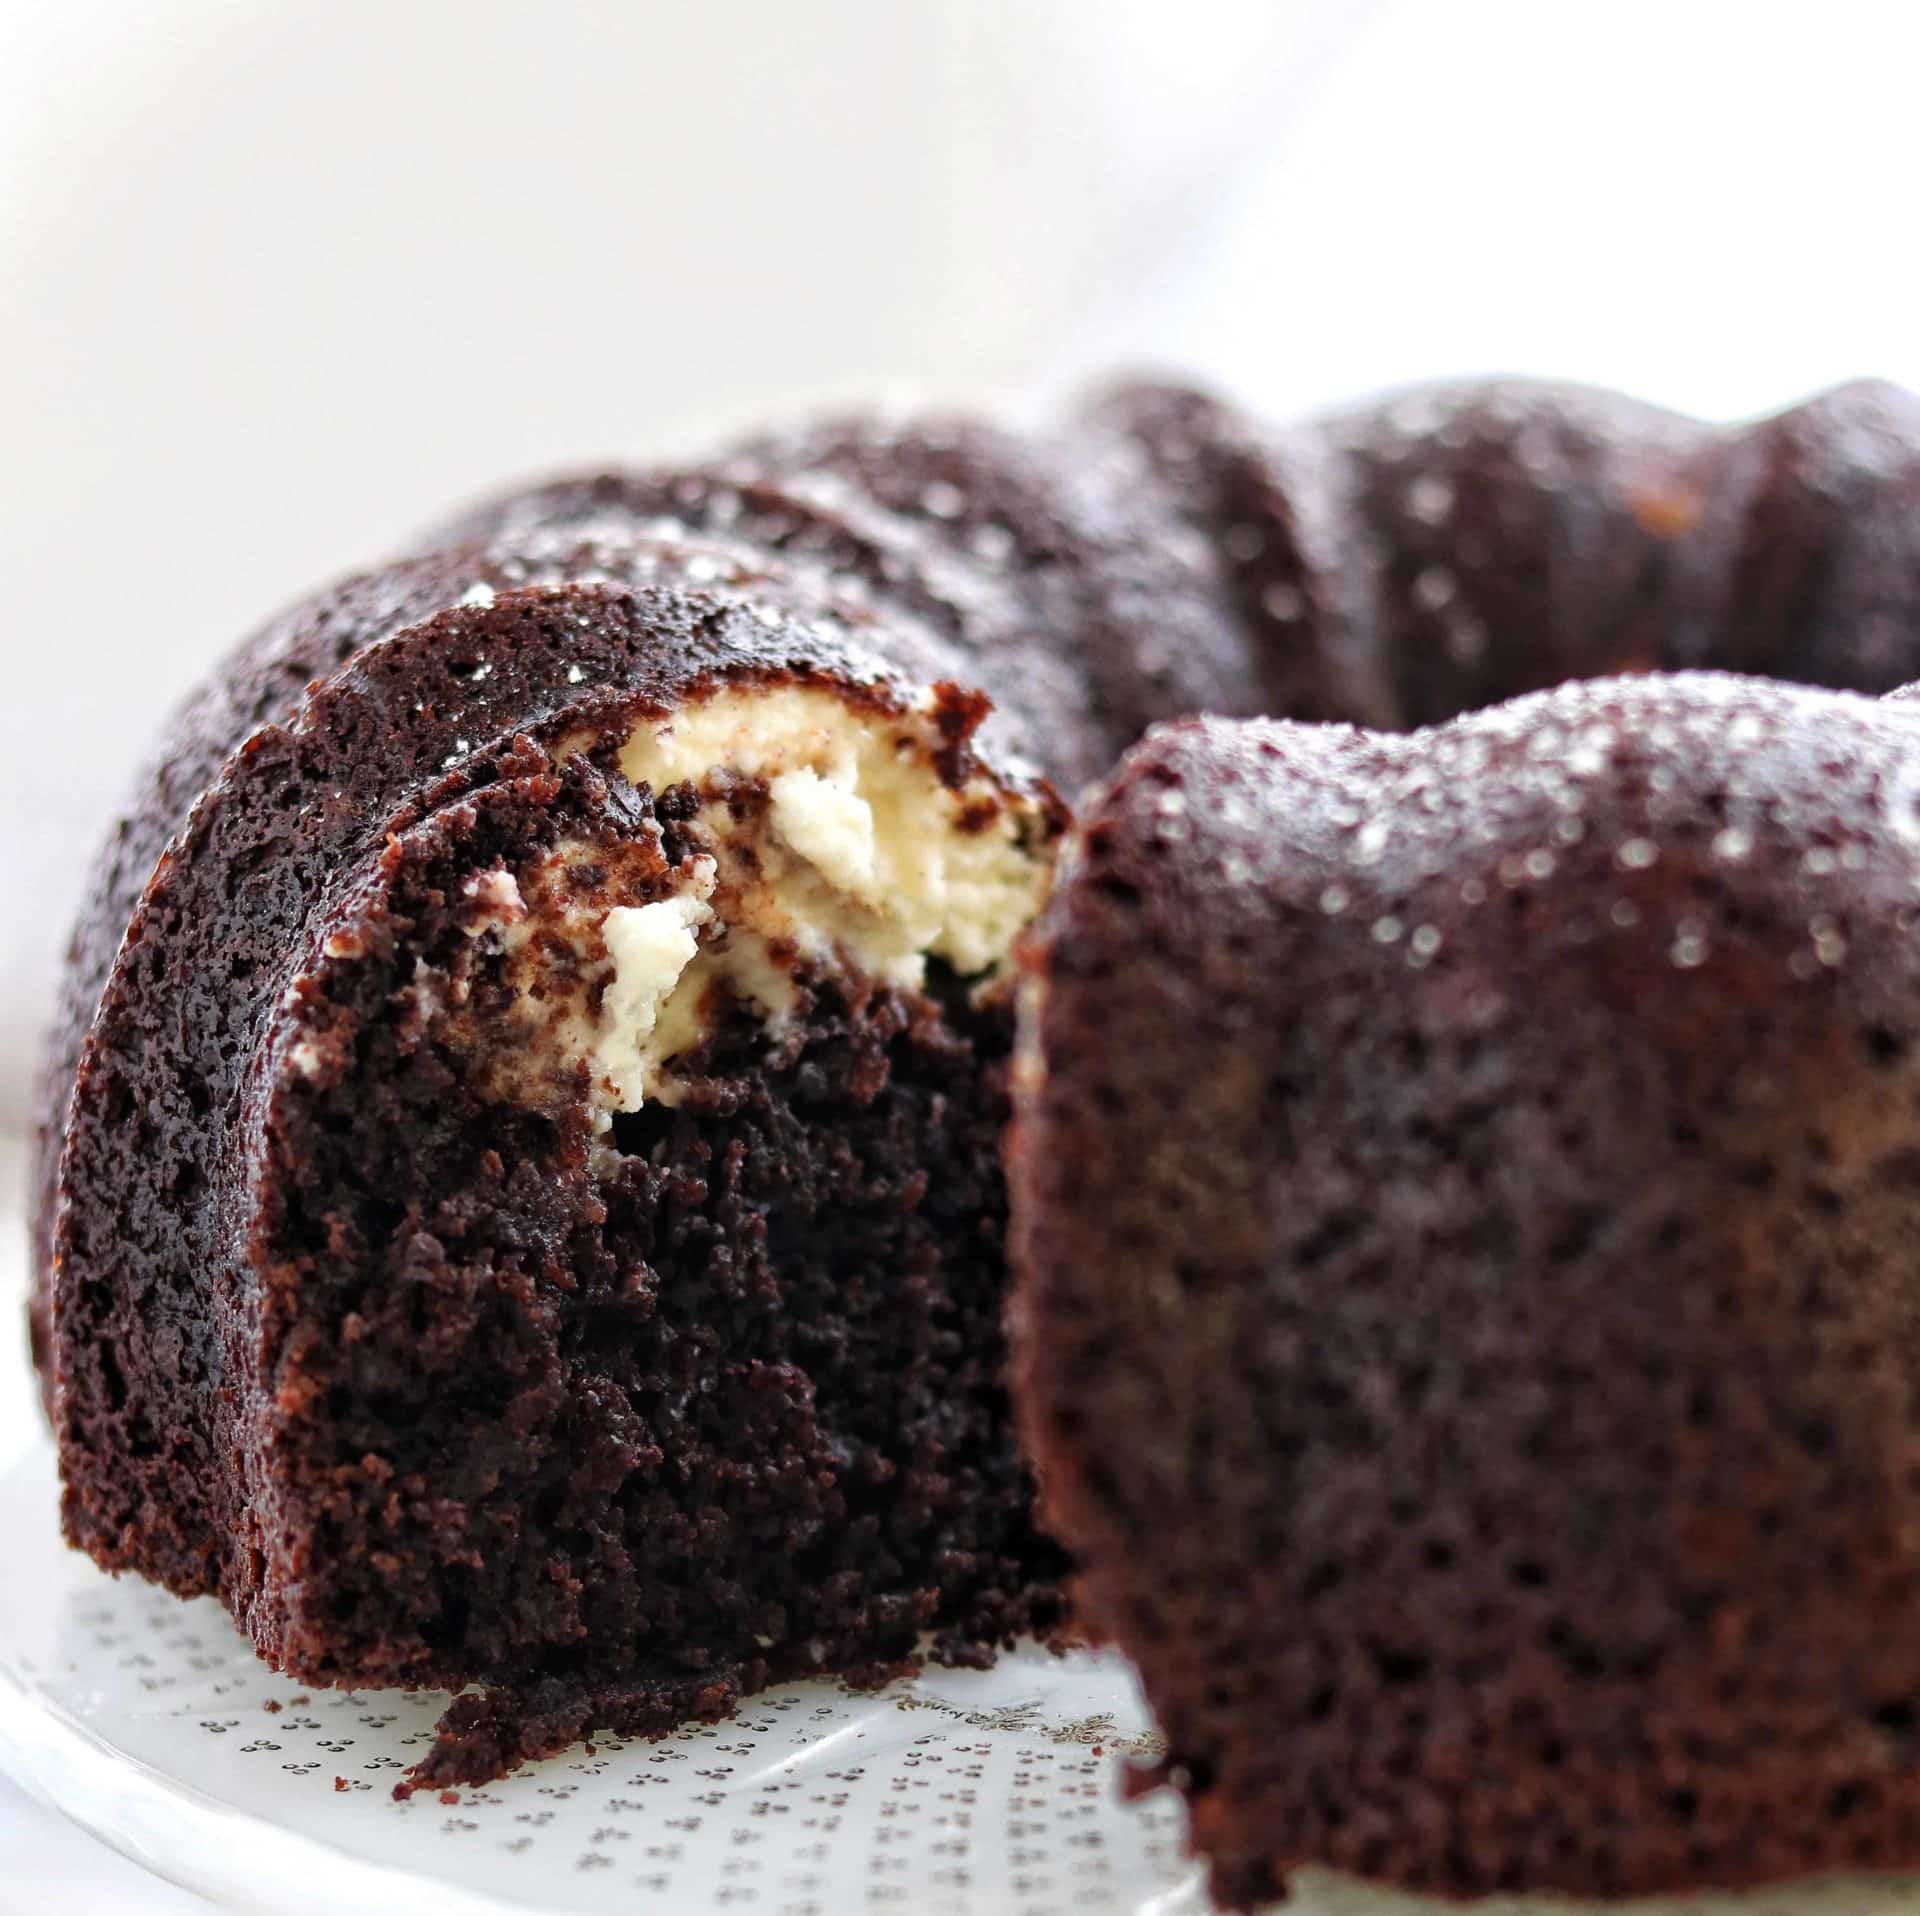 Chocolate Bundt Cake with Cream Cheese Filling